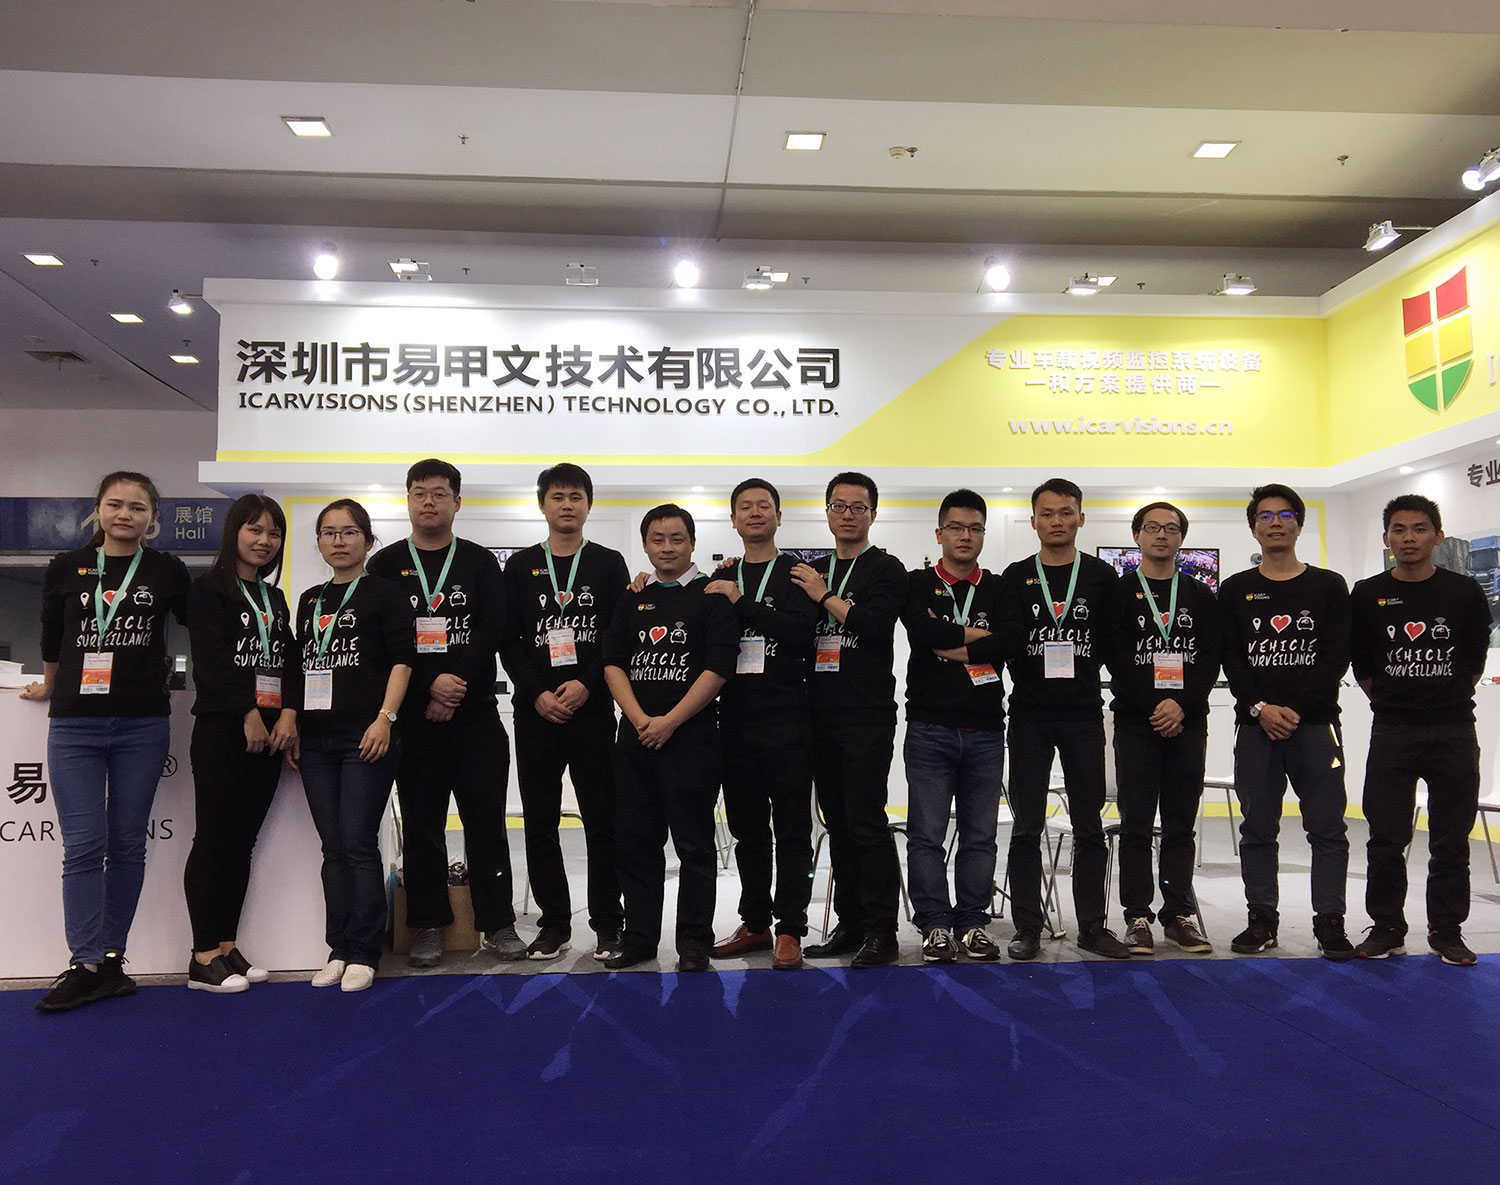 Thank you for visiting Our Booth at CPSE 2017 in Shenzhen! Picture1